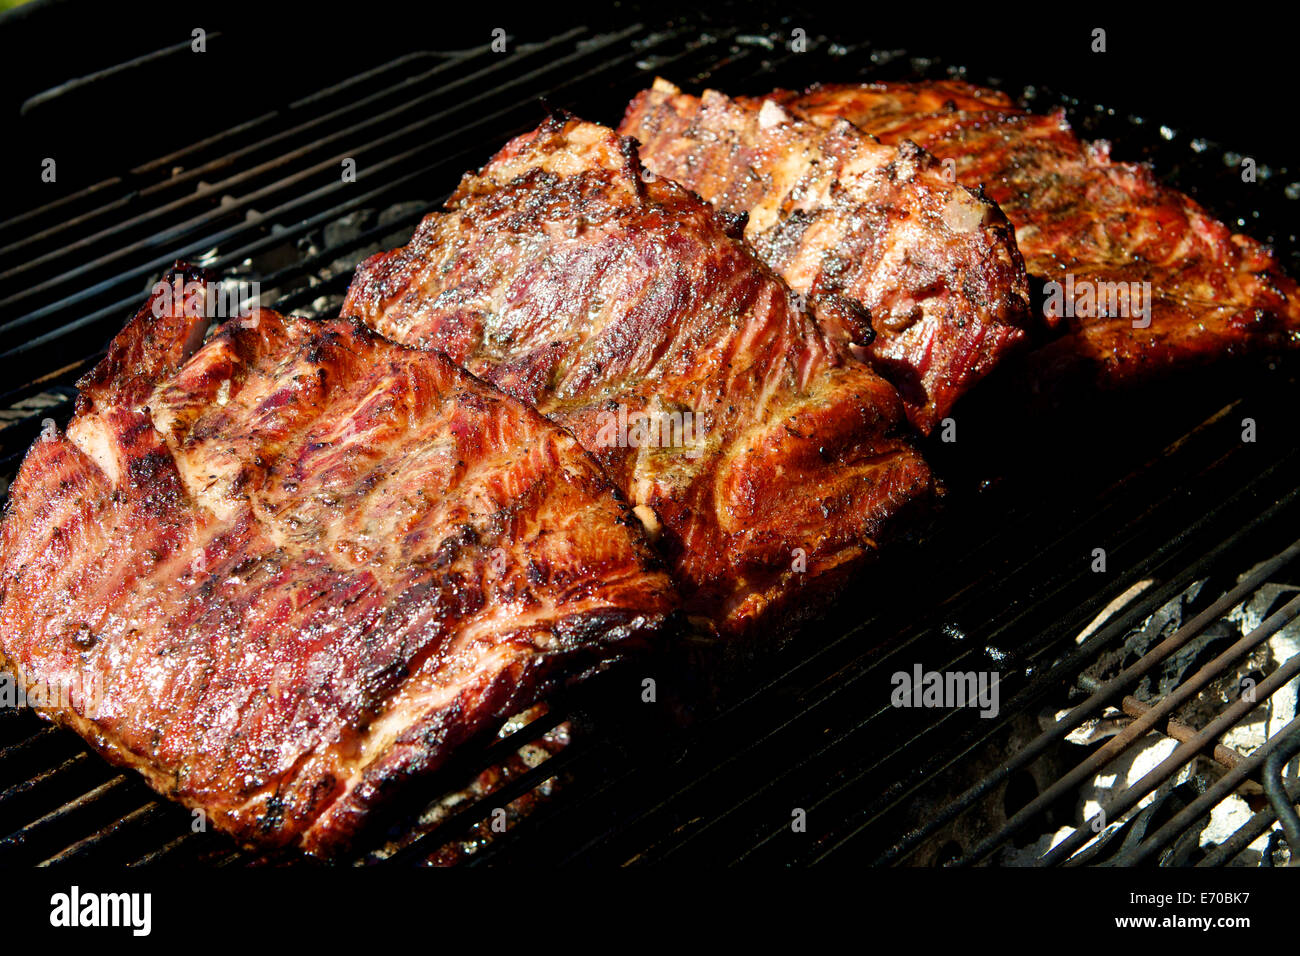 Barbecued  rack of   pork ribs outside in a garden Stock Photo